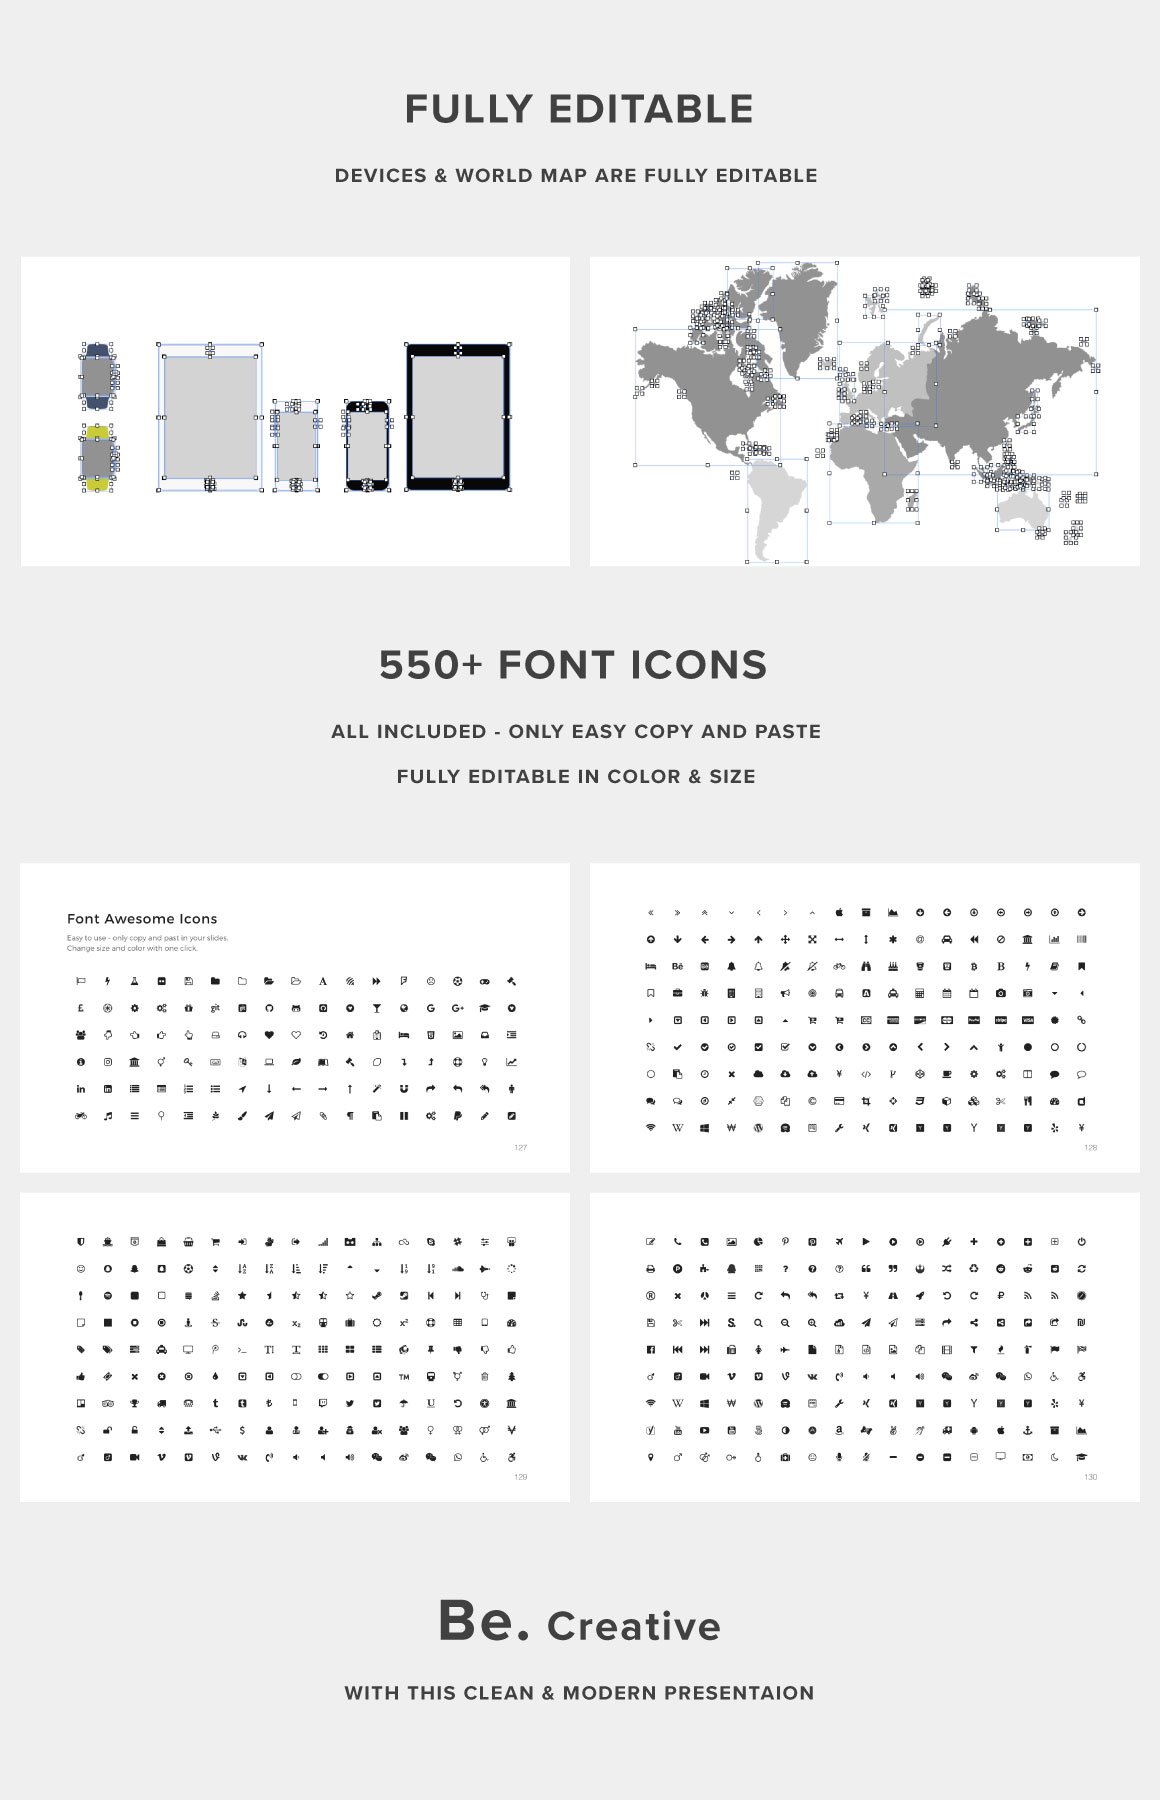 Light grey extra elements for your presentation.